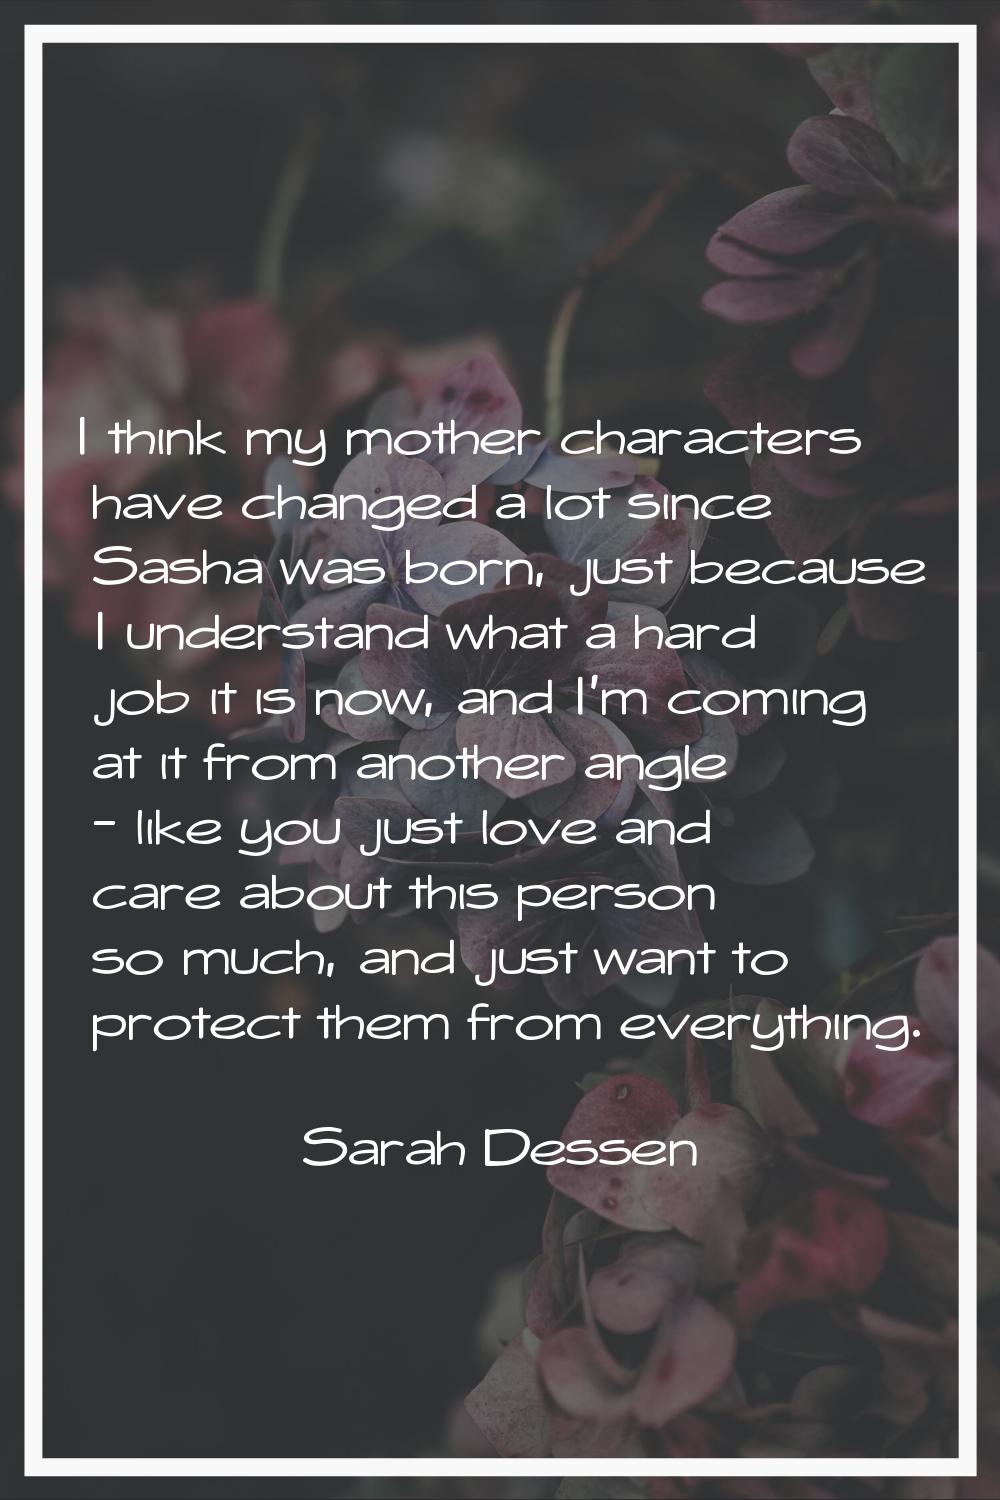 I think my mother characters have changed a lot since Sasha was born, just because I understand wha